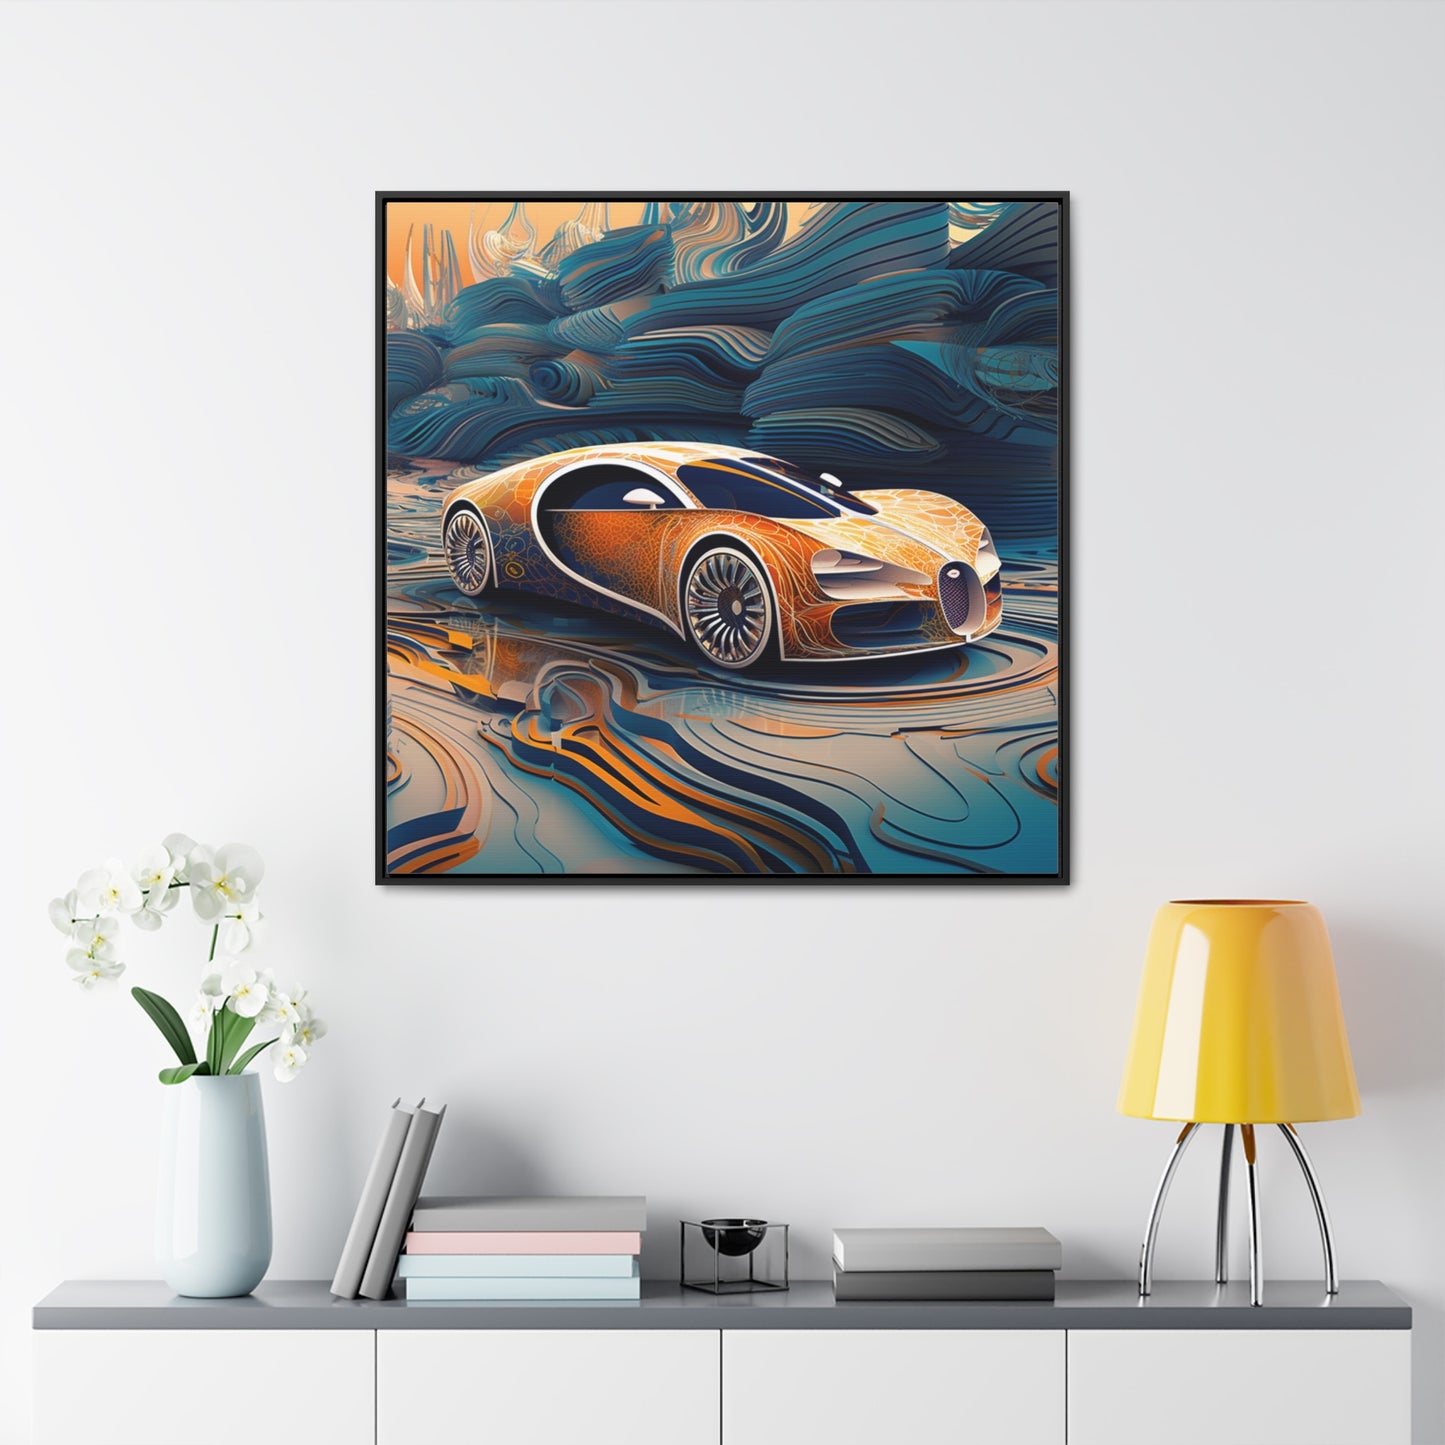 Gallery Canvas Wraps, Square Frame Bugatti Abstract Flair 1